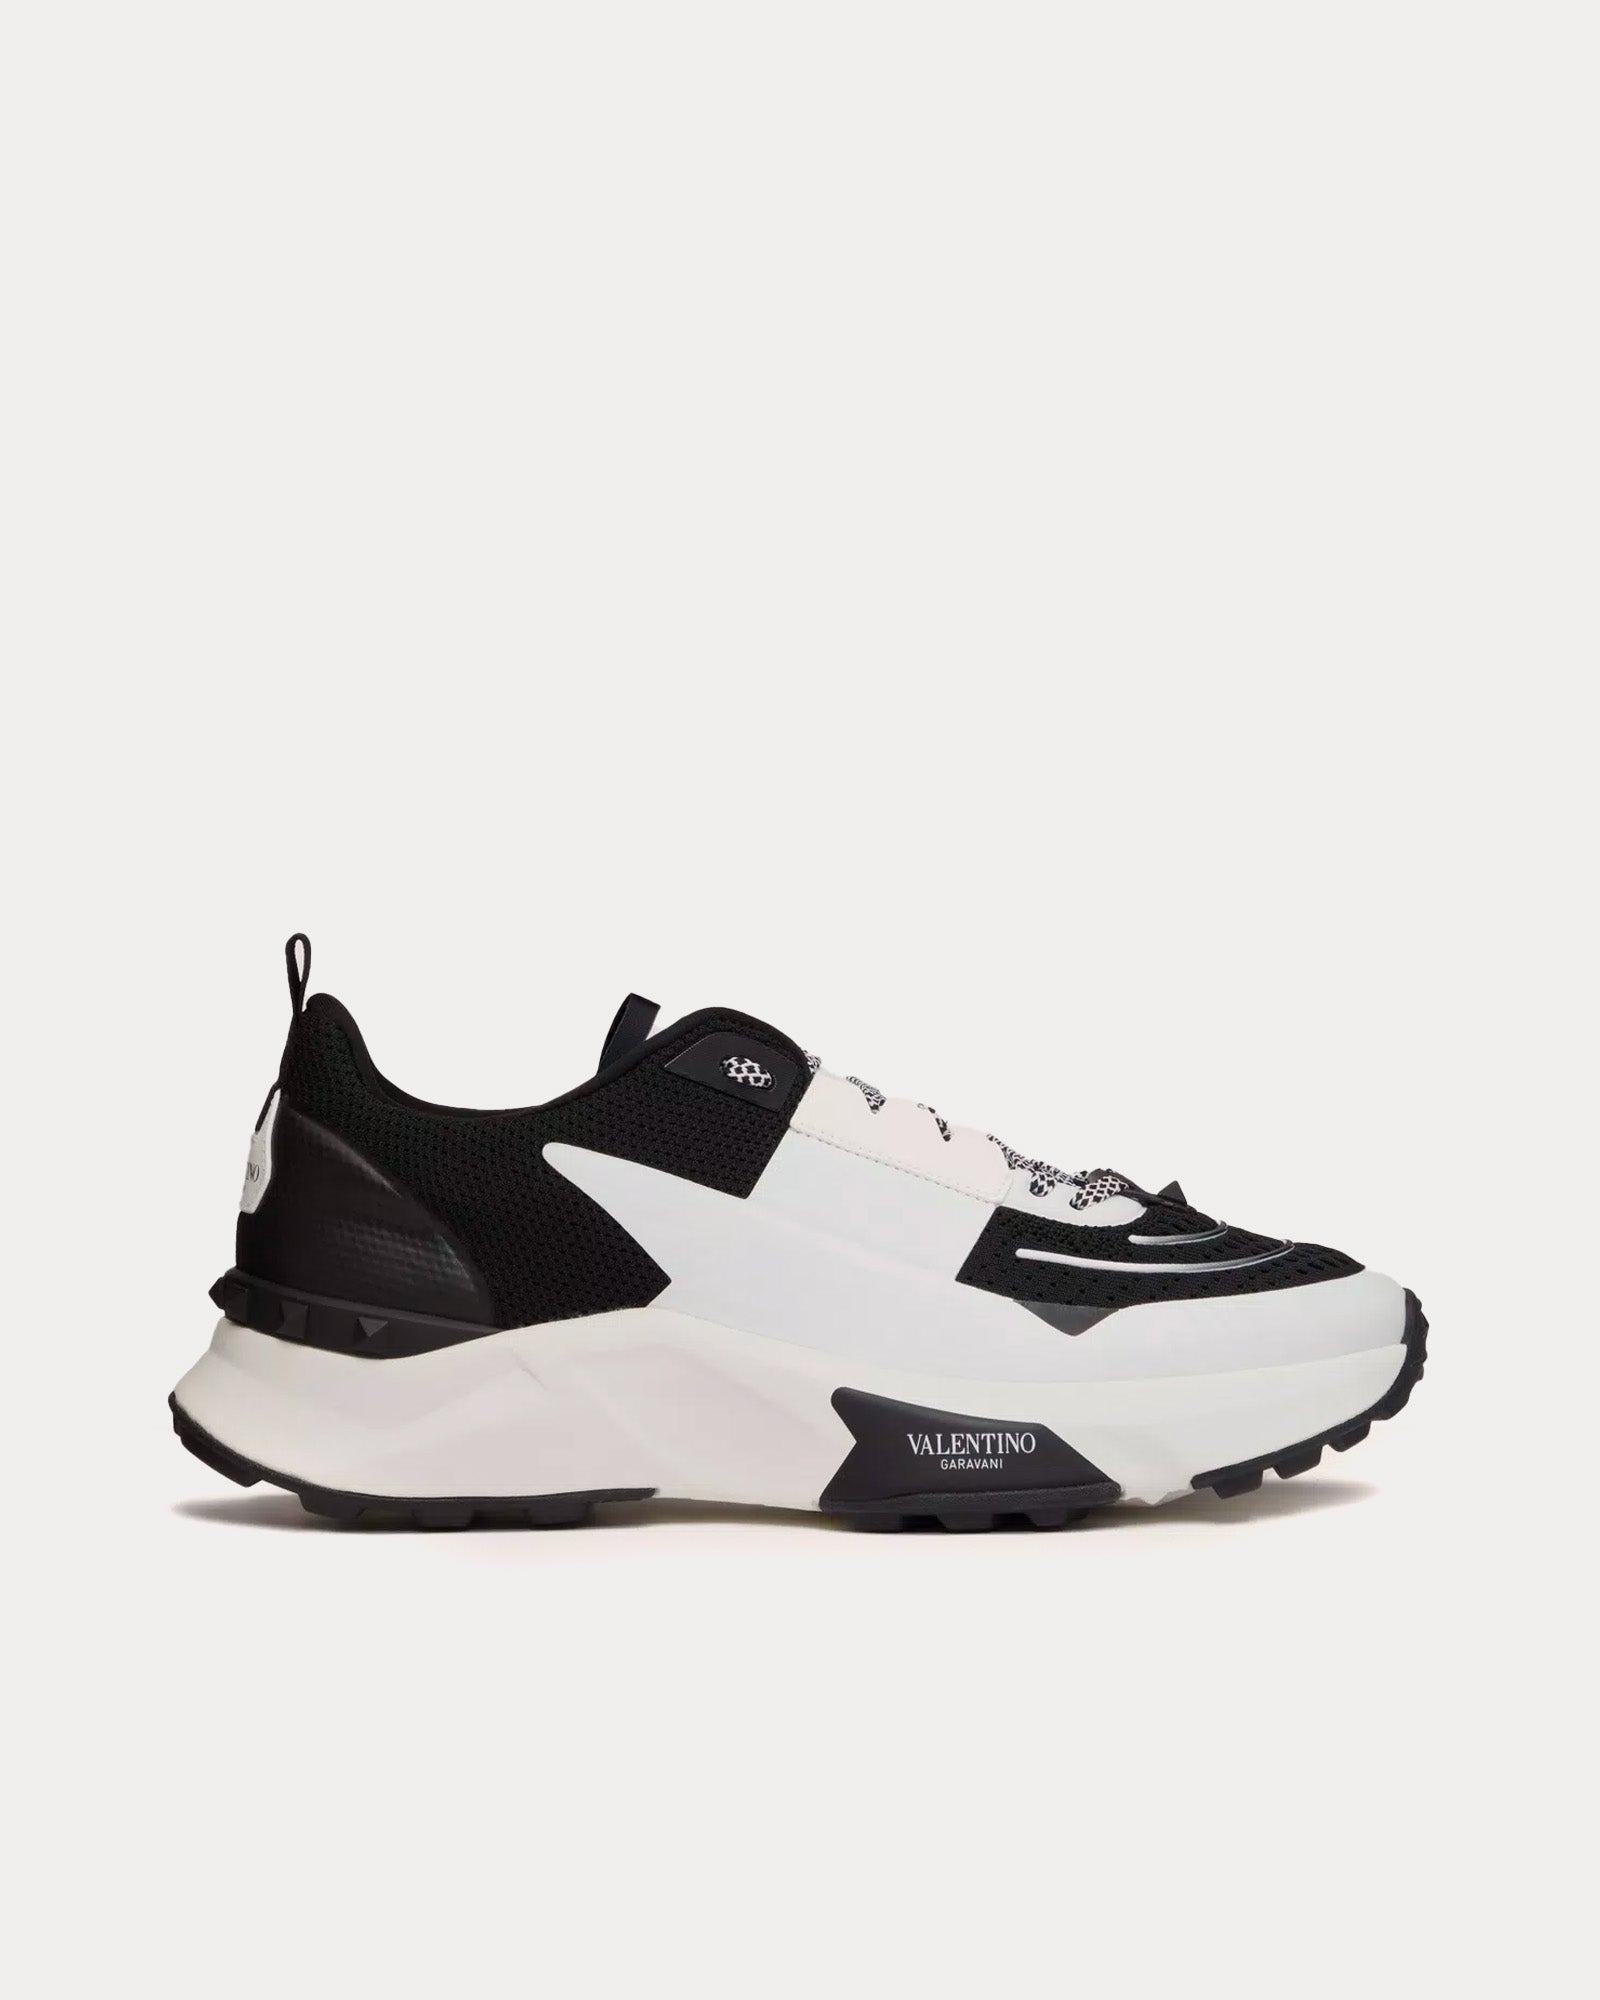 Valentino - True Act Mesh & Rubberised Fabric Black / White Low Top Sneakers